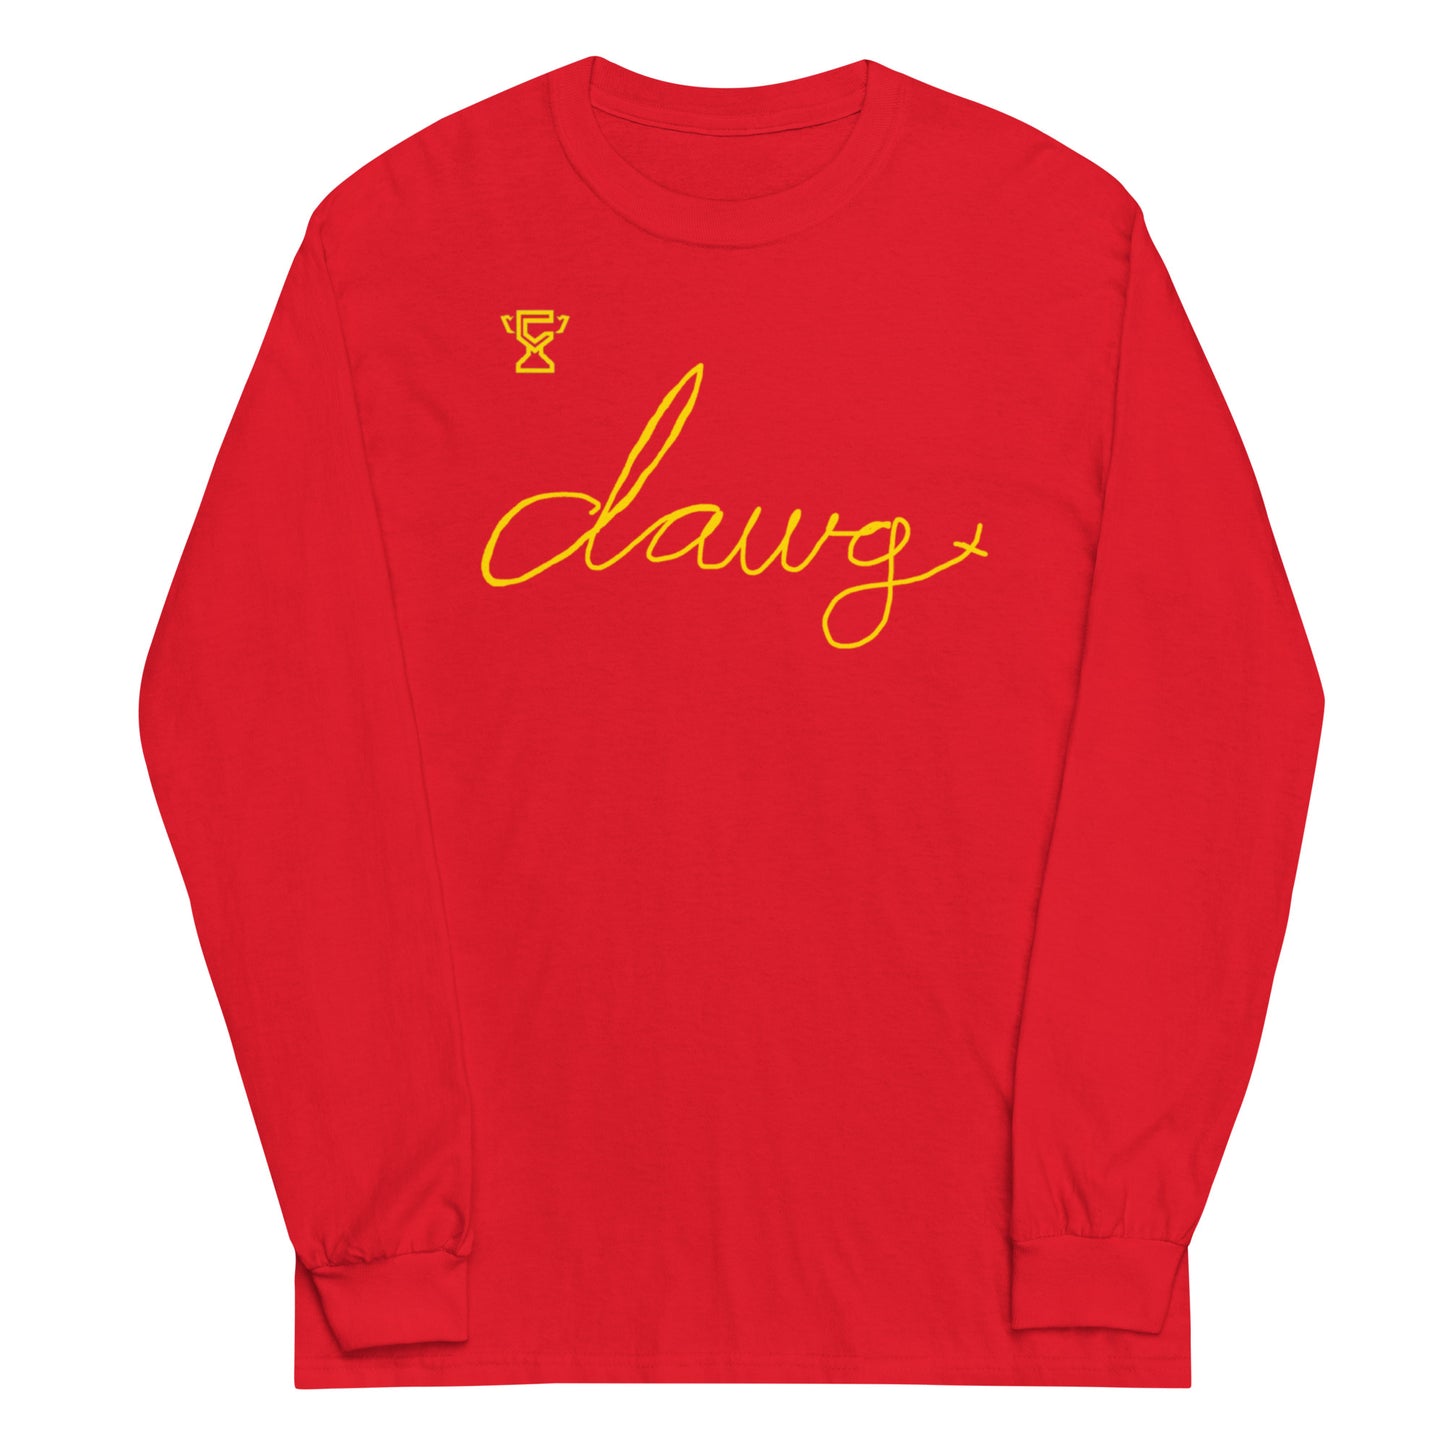 Red long sleeve t-shirt of Terrell Carter-Williams.